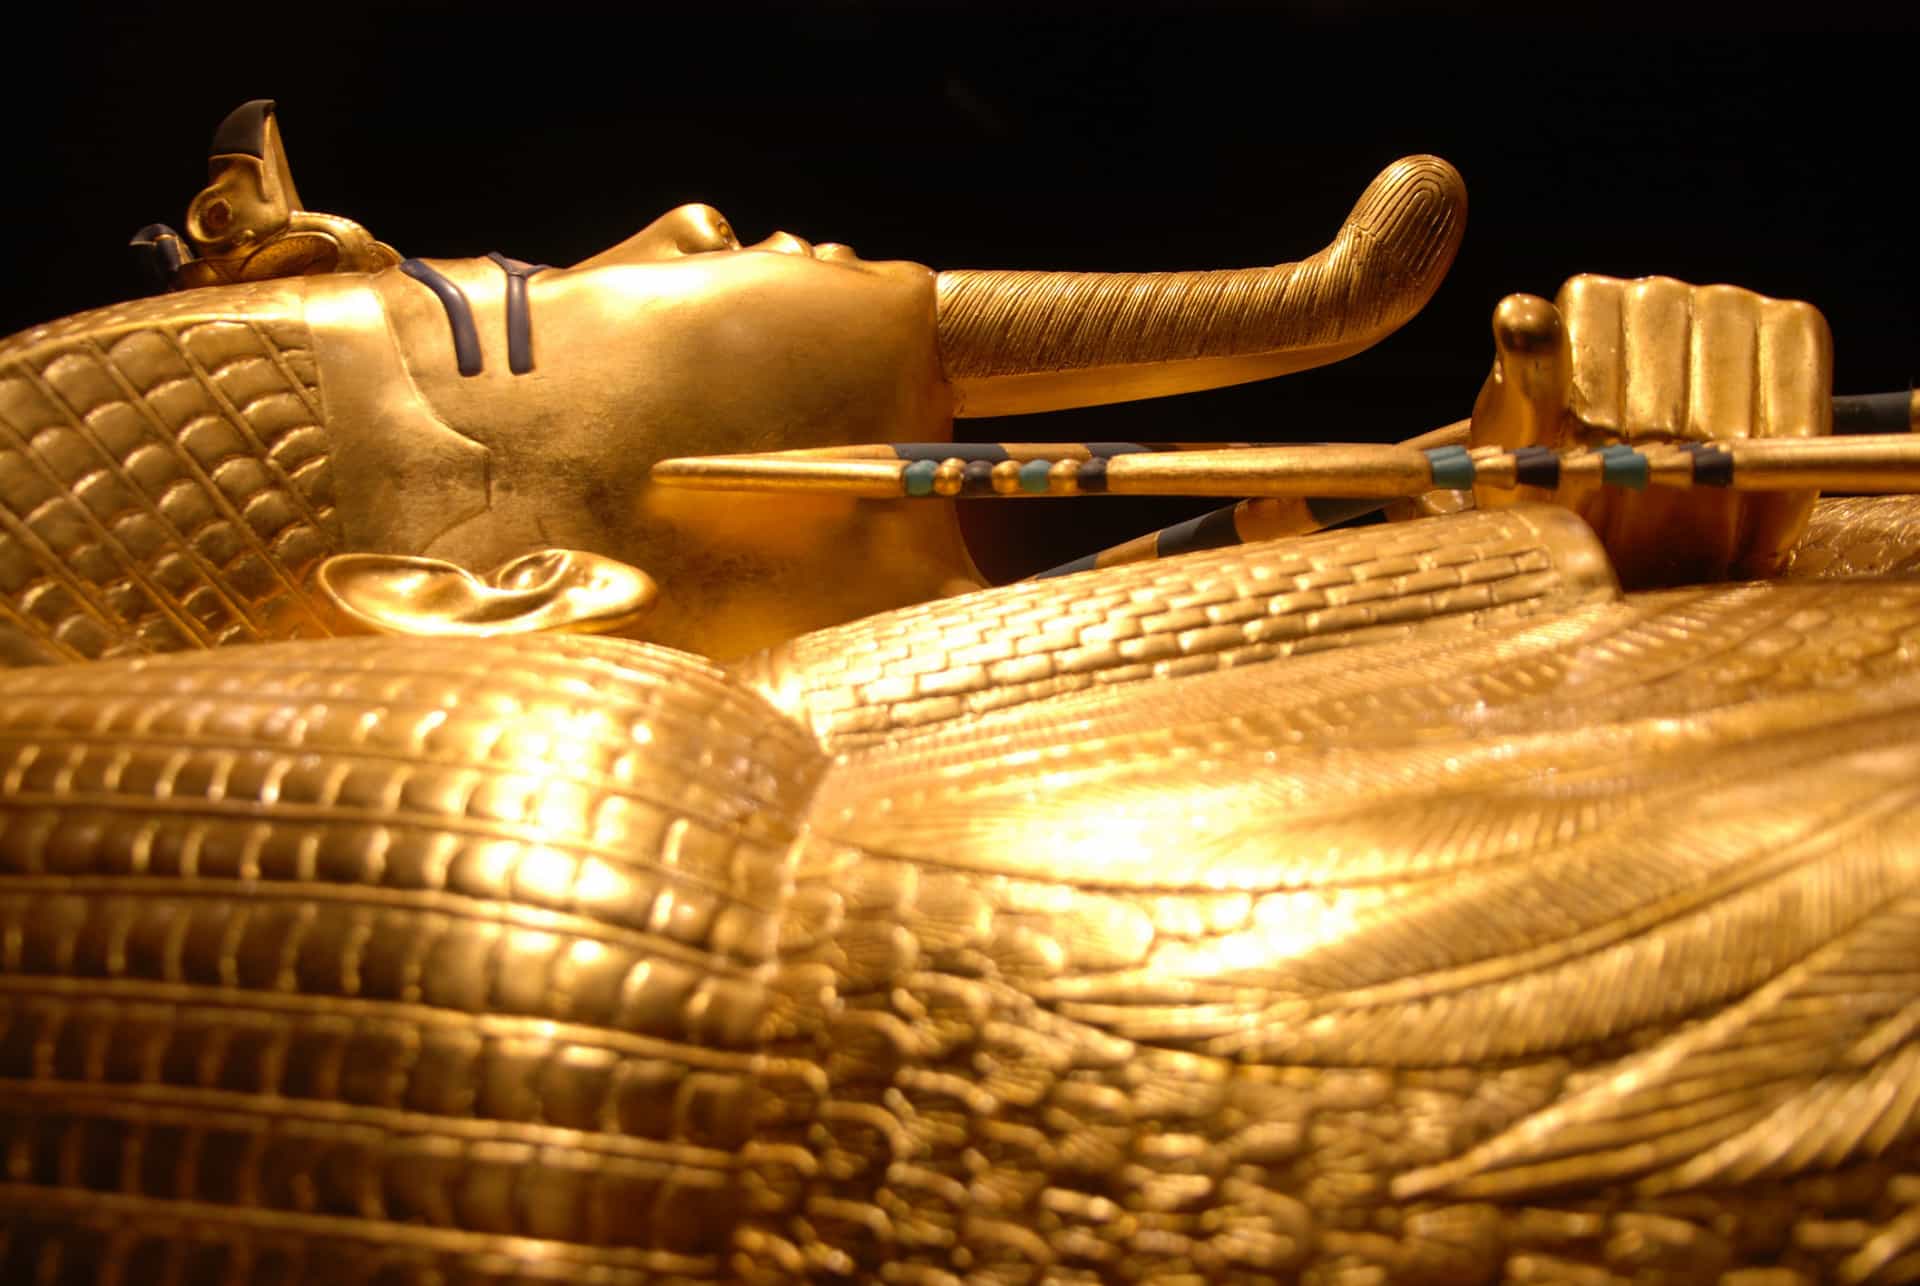 King Tut's brilliant gold coffin is naturally one of the museum's stand-out exhibits.